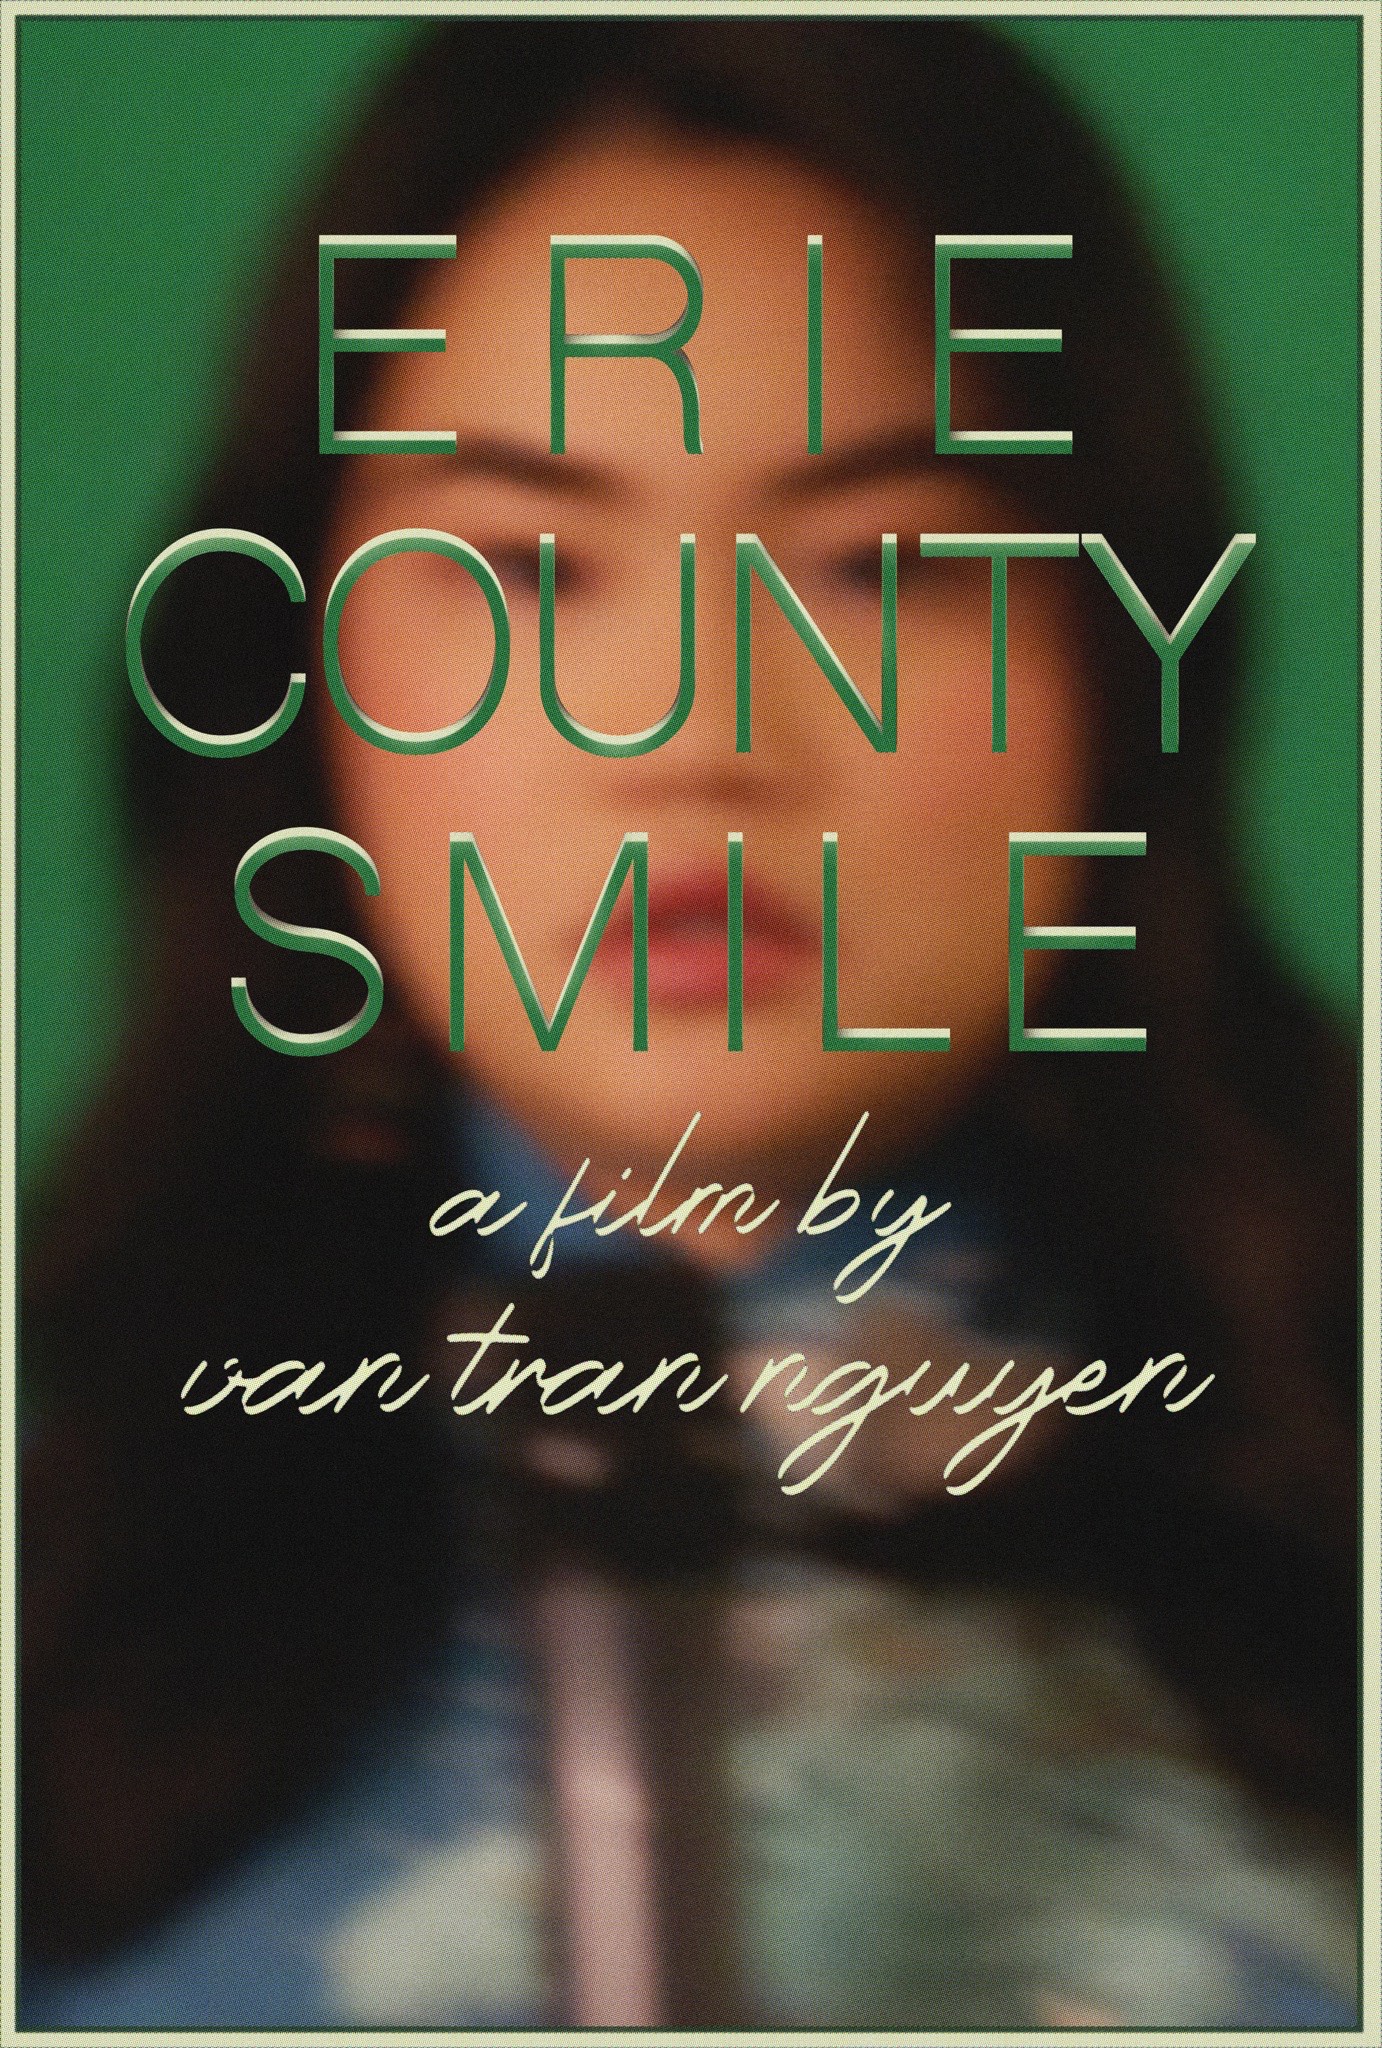 n.1 Erie County Smile 